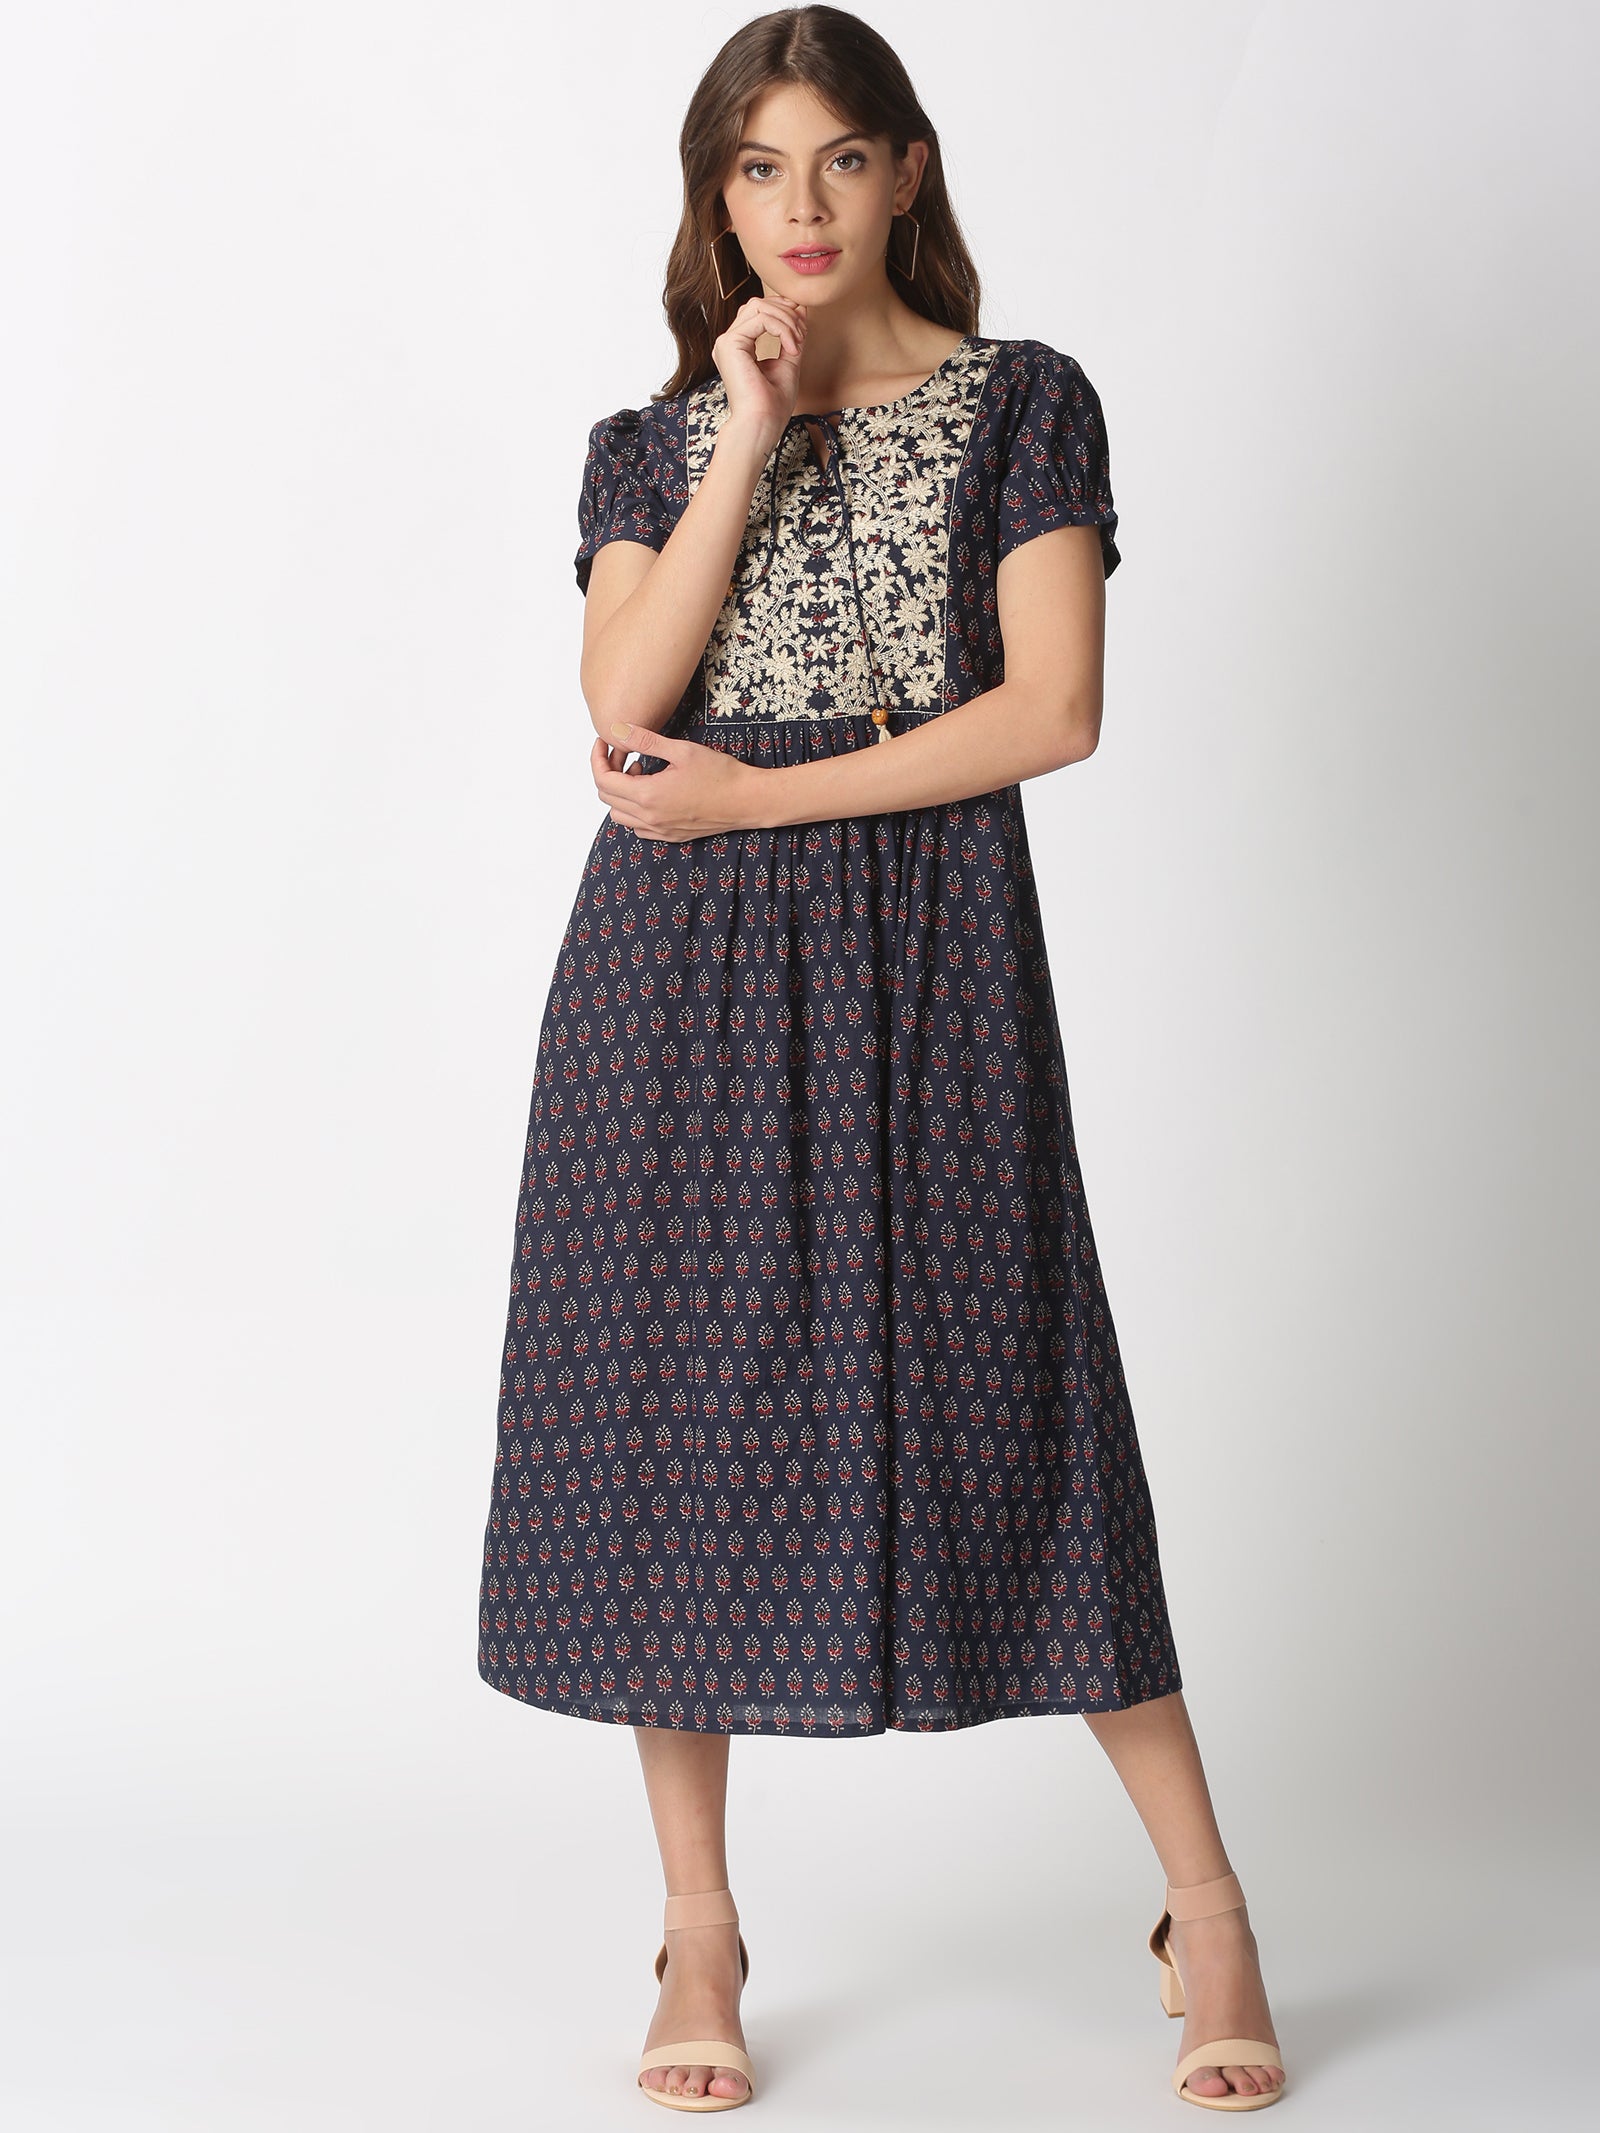 Navy Ethnic Motifs Printed Dress with Floral Embroidered Yoke